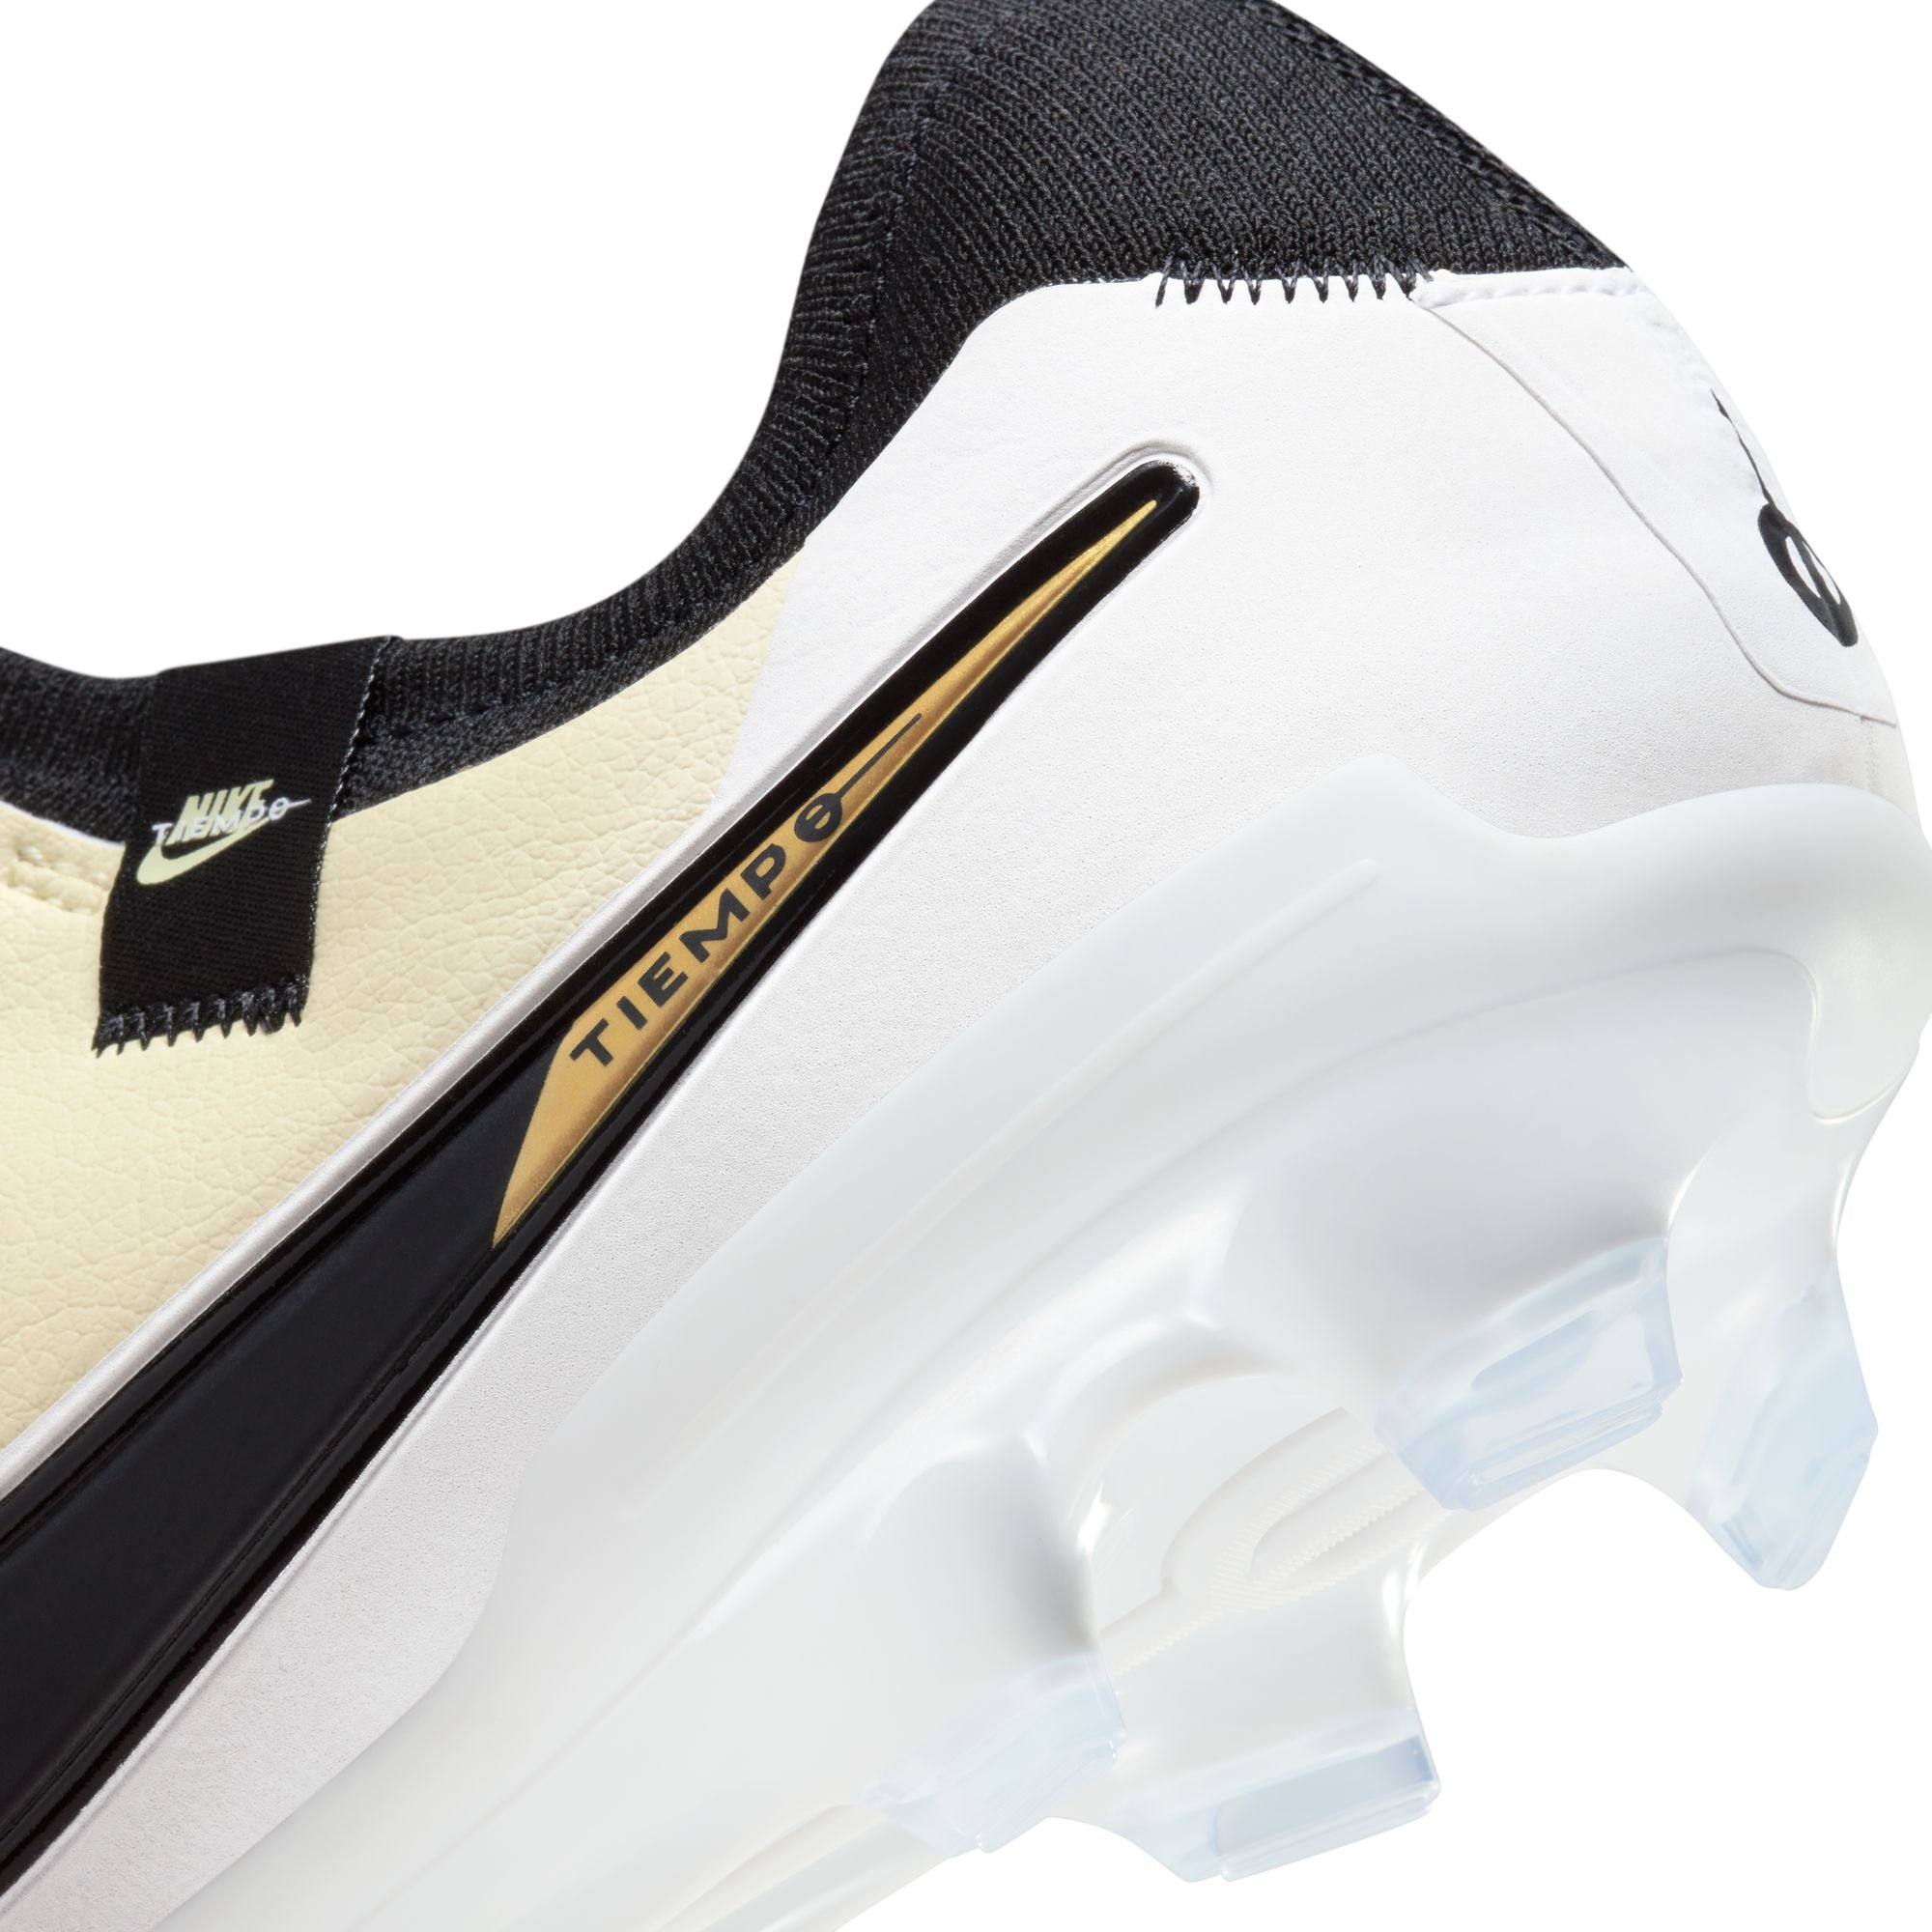 Jamal Musiala Nike Tiempo Legend 10 Pro Firm-Ground Low-Top Soccer Cleats